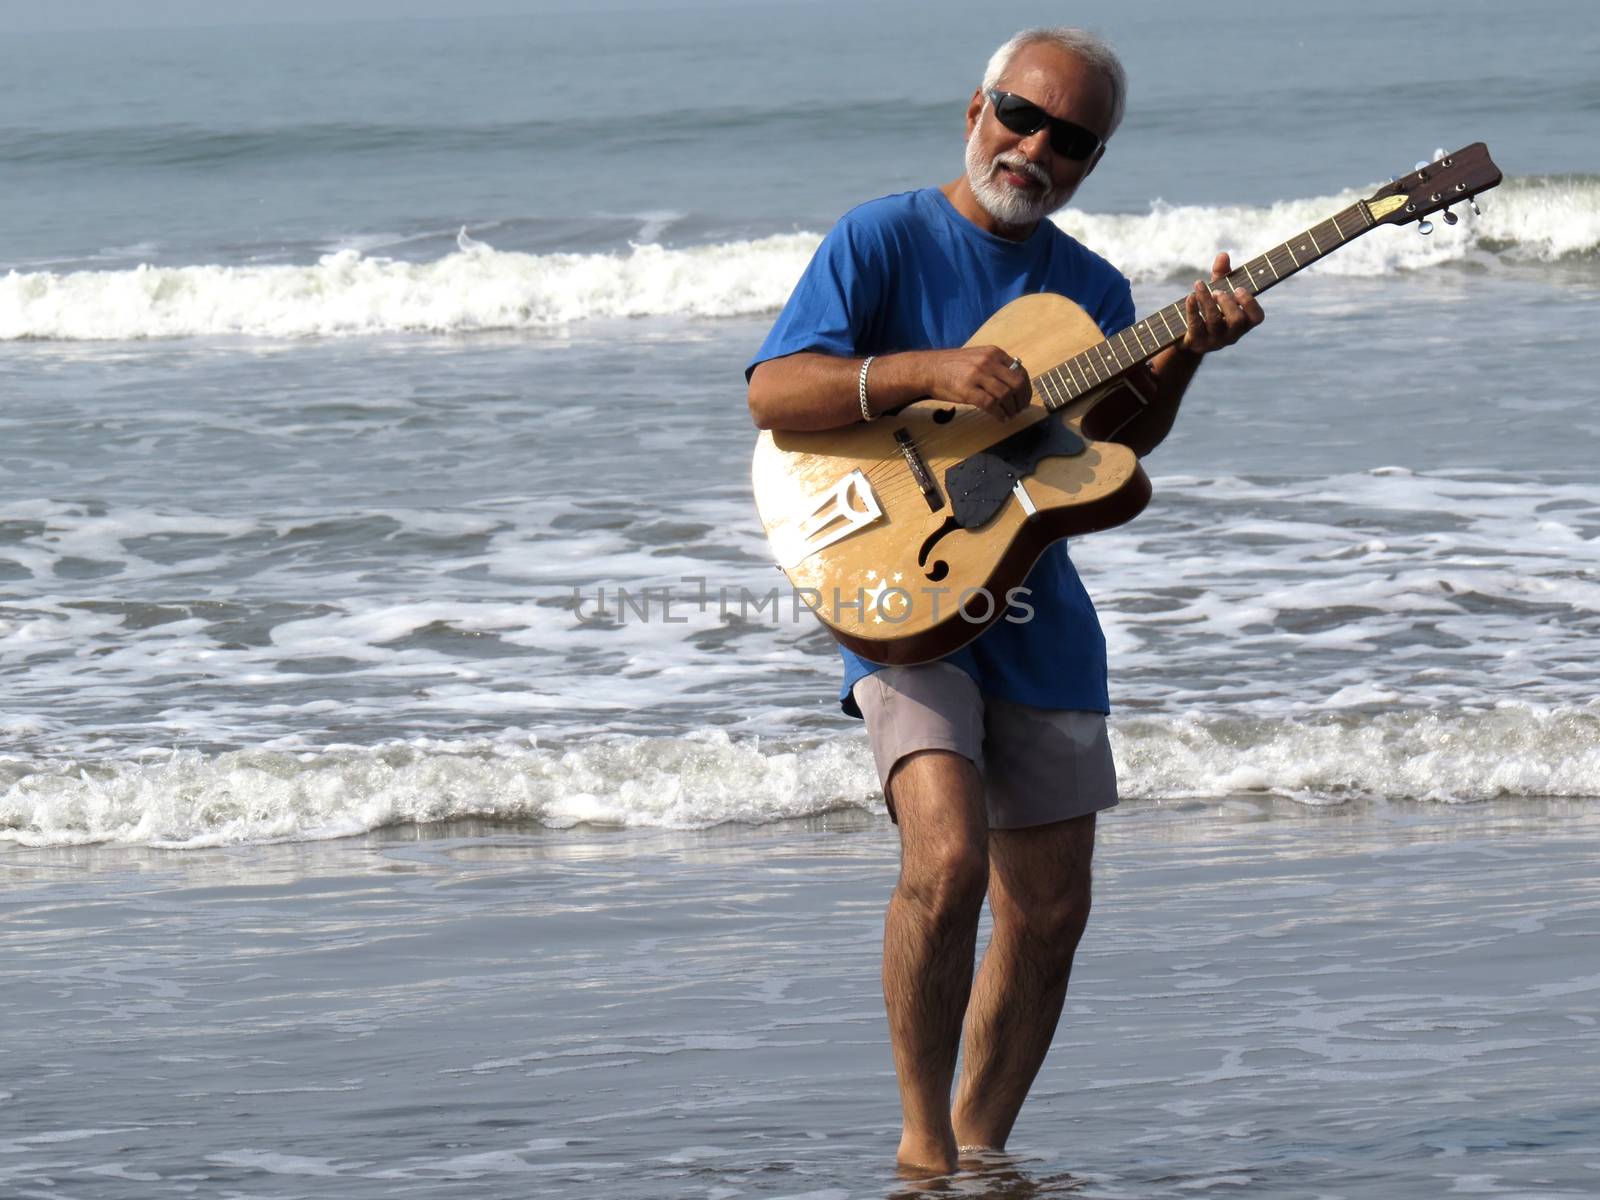 A senior Indian musician playing guitar and singing in the sea                               